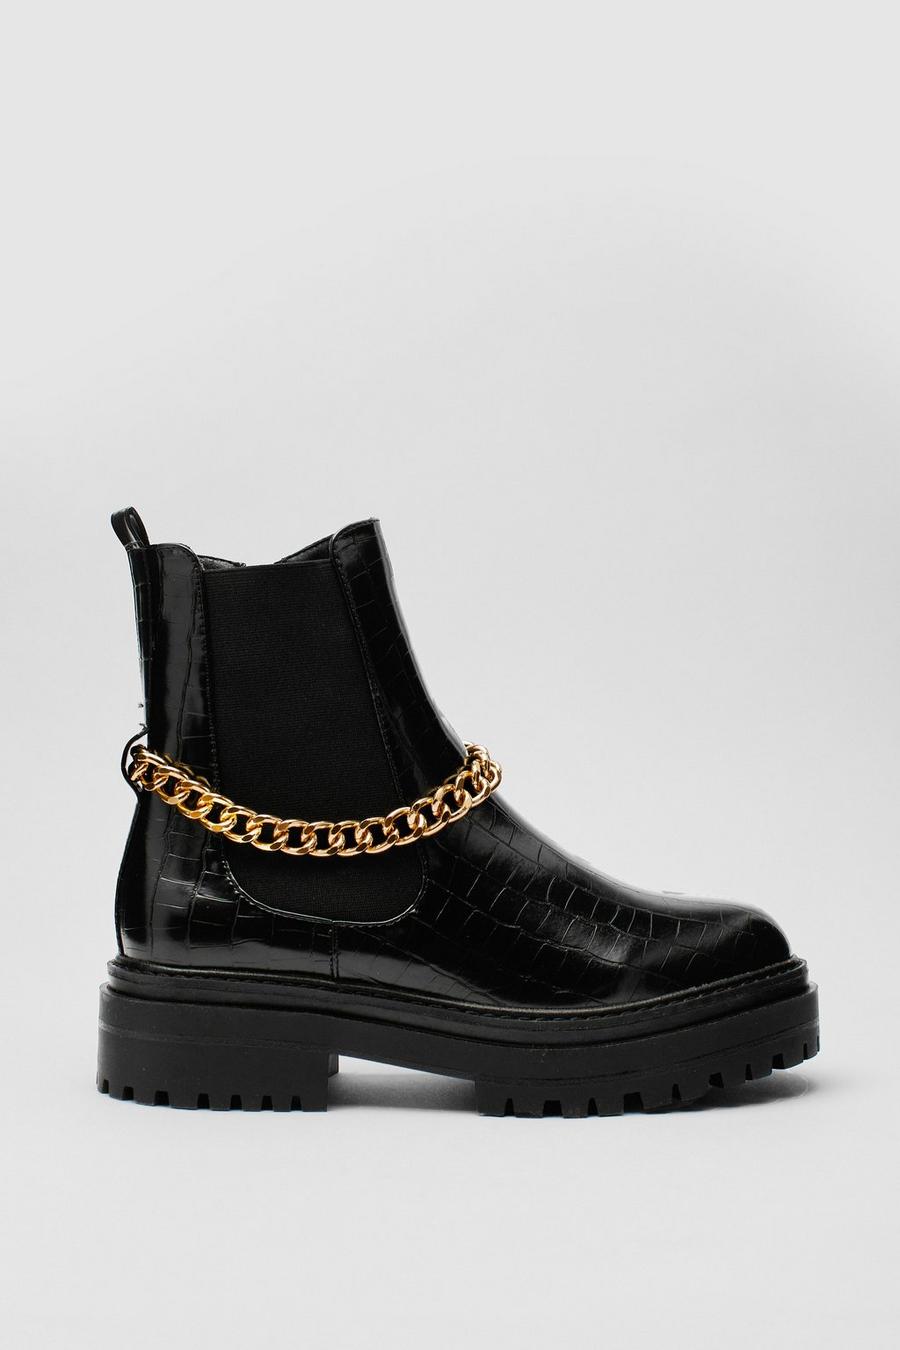 Black Chain Croc Embossed Chelsea Boots